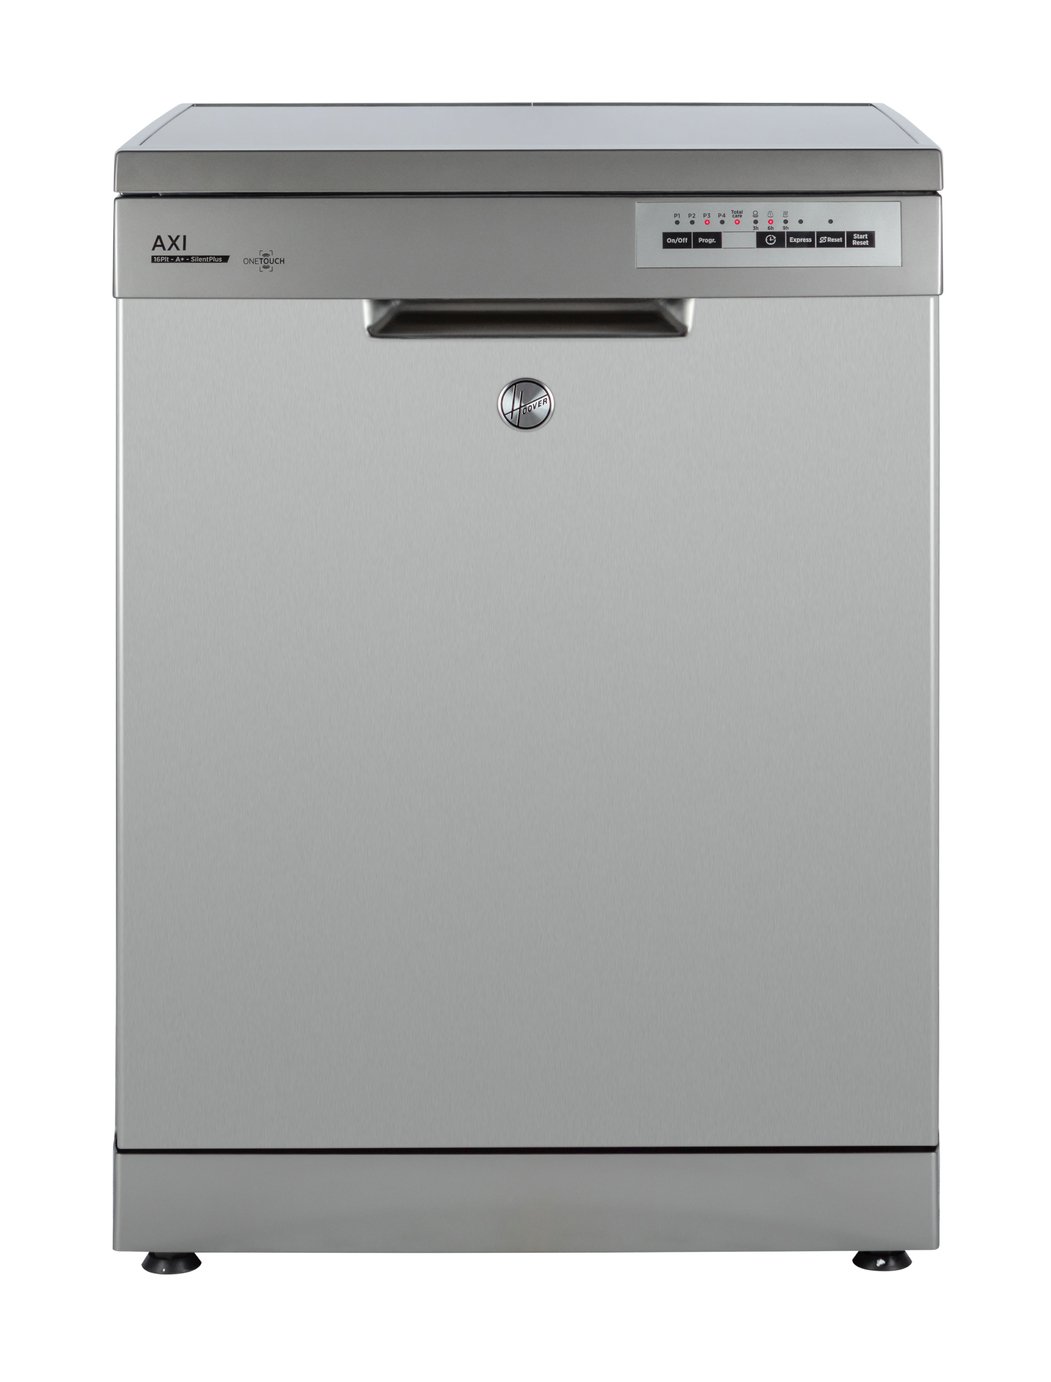 Hoover HDPN 1L642OX Full Size Dishwasher - Stainless Steel